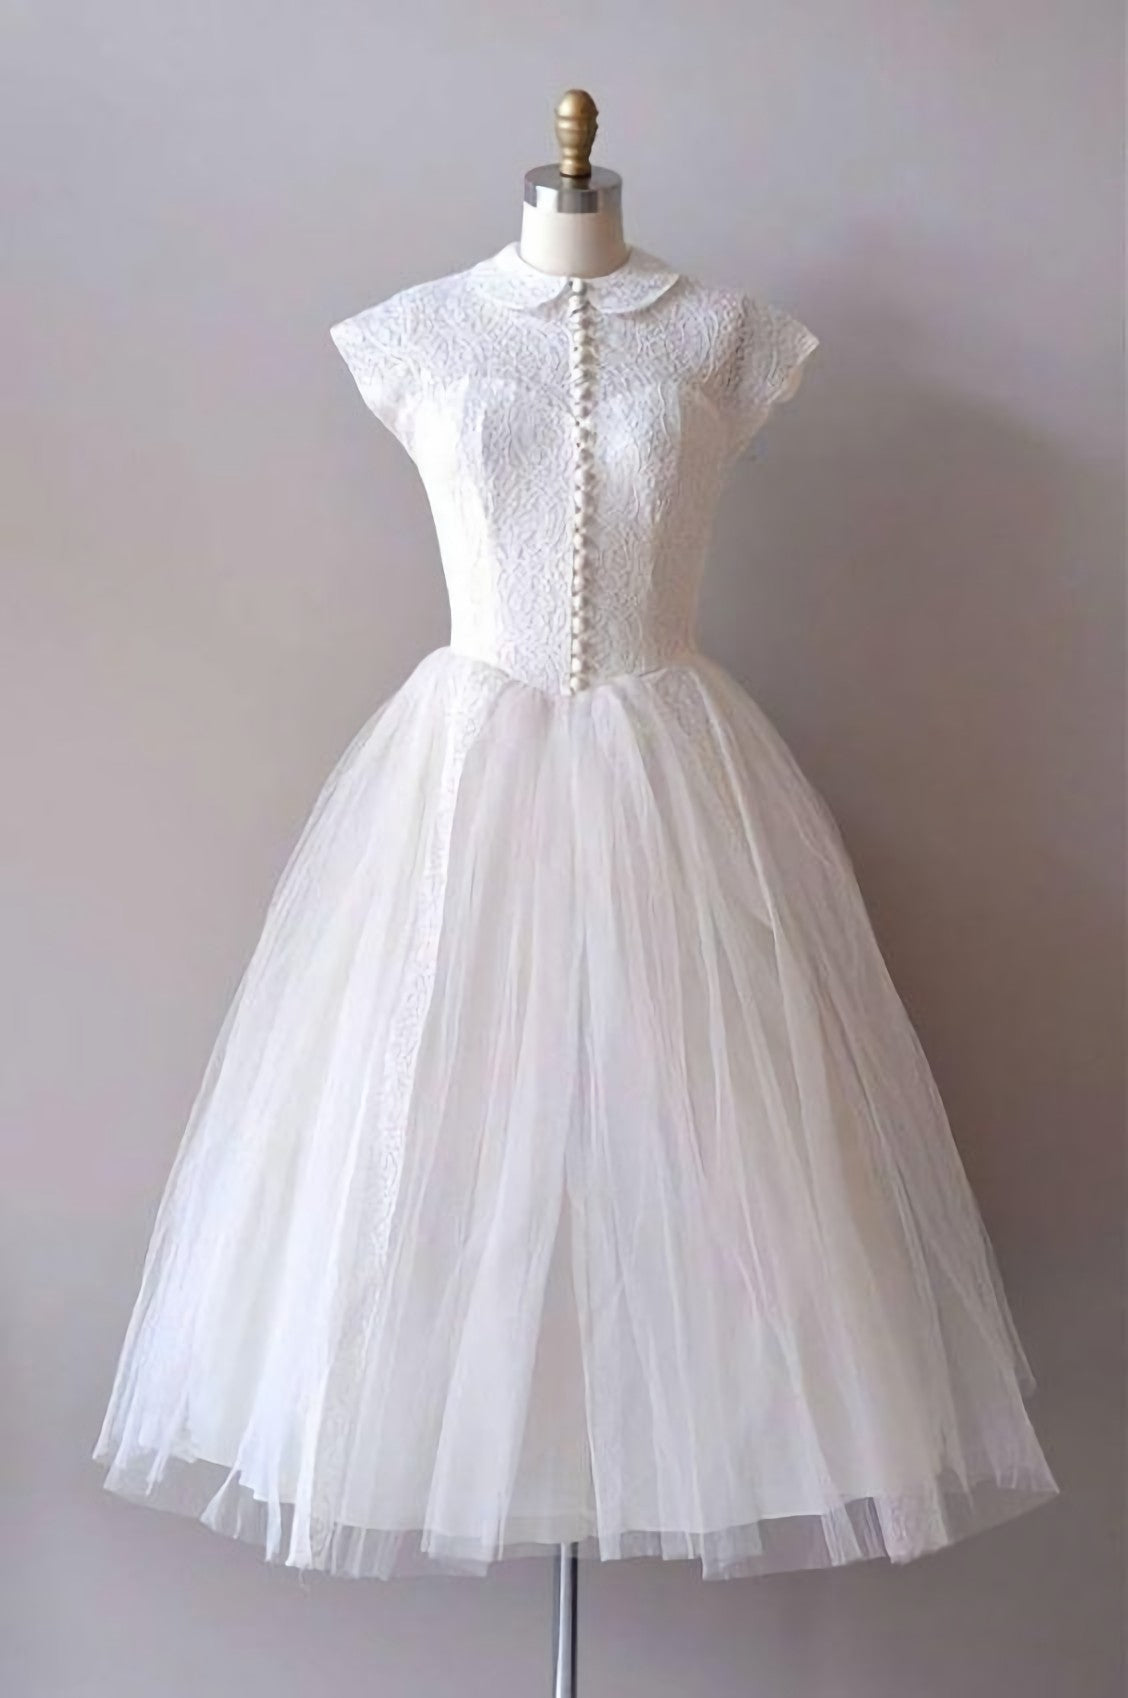 Bachelorette Party Outfit, Vintage White Homecoming Dress